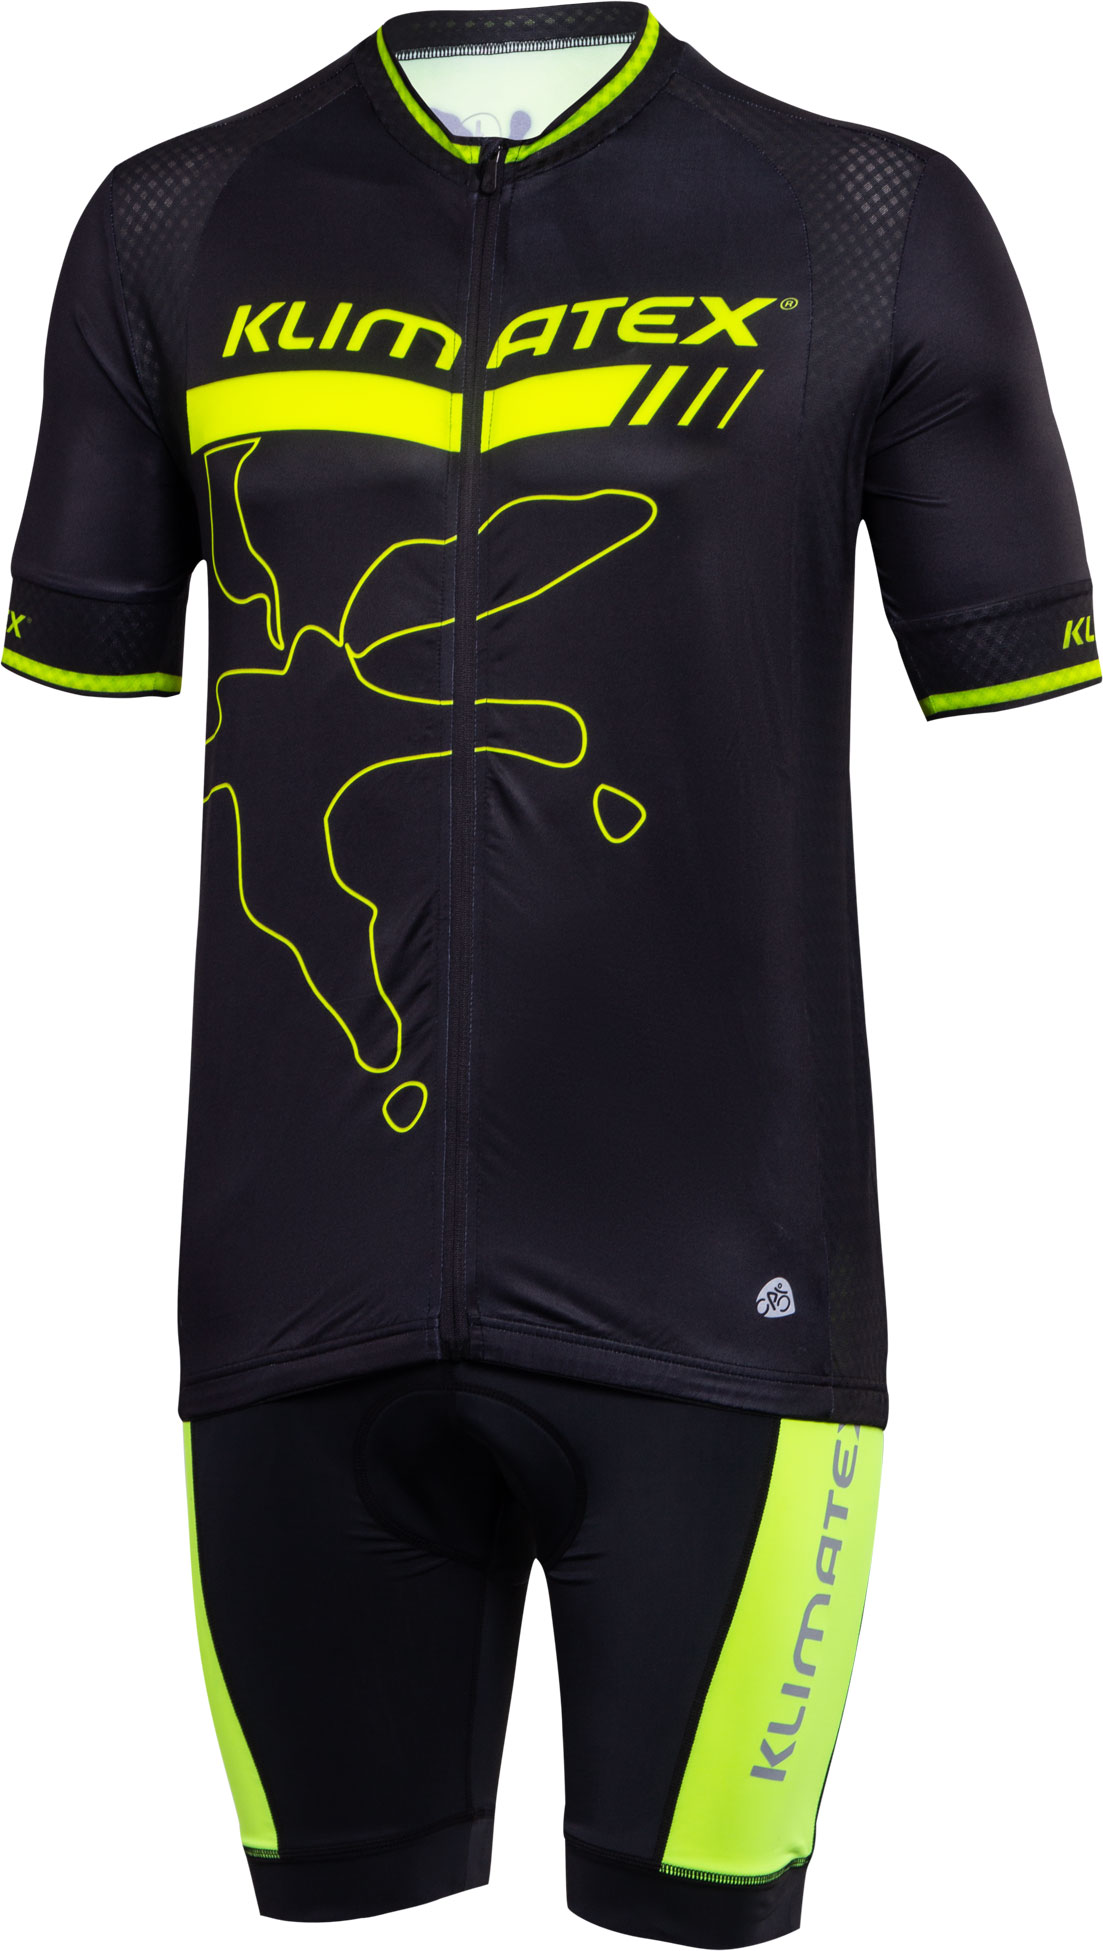 Men’s cycling jersey with a sublimation print